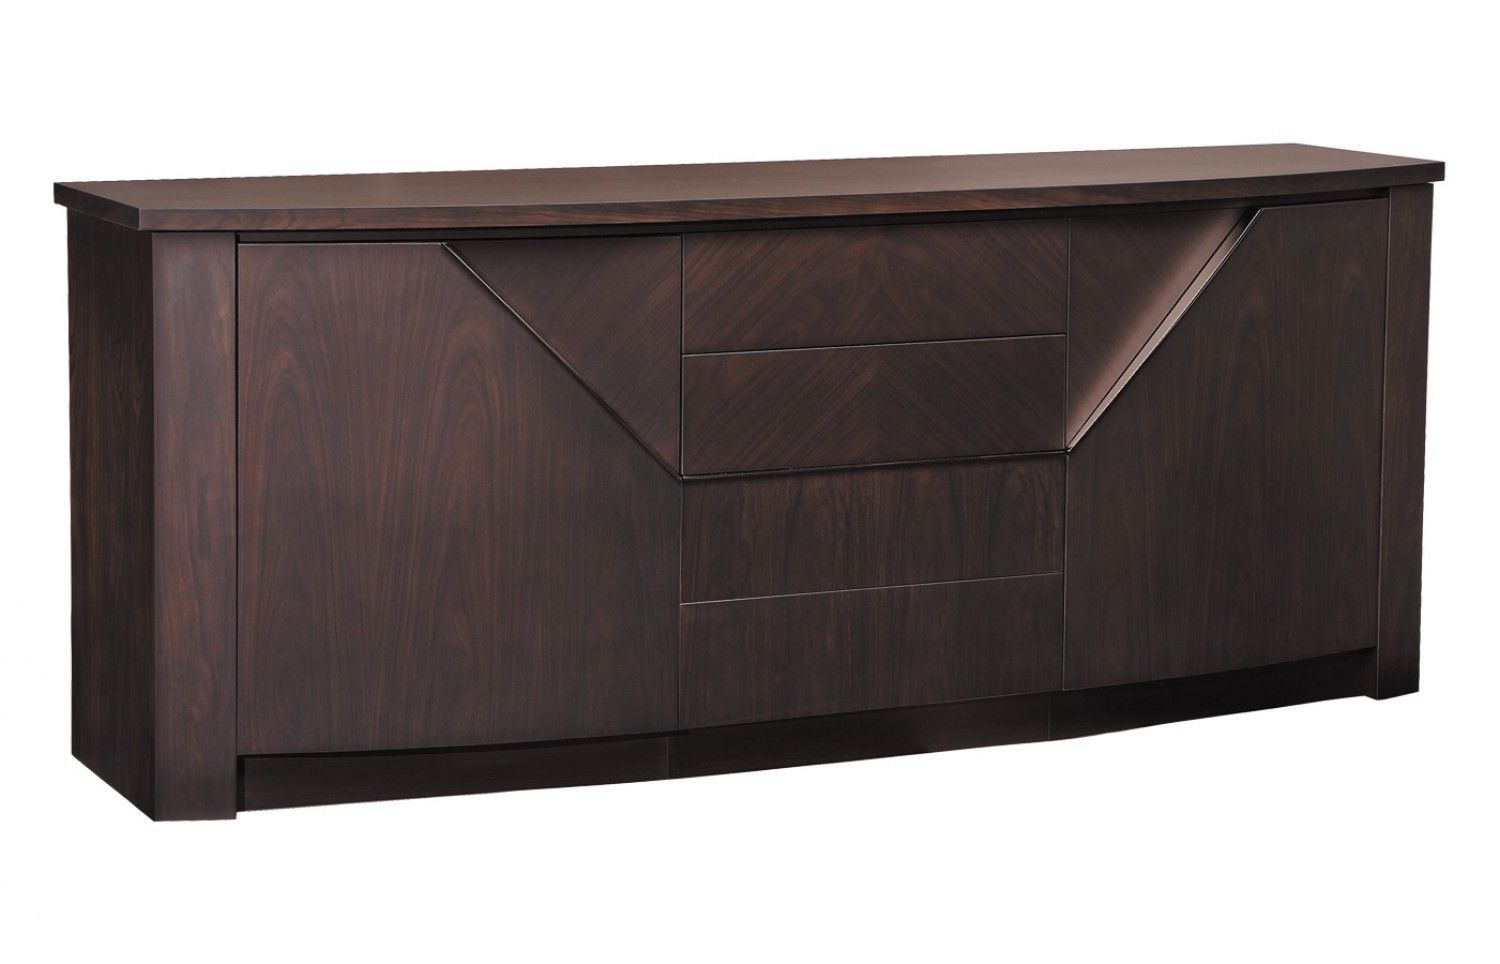 Tribeca | Smania | Furniture | Sideboard Furniture Throughout Tribeca Sideboards (View 13 of 30)